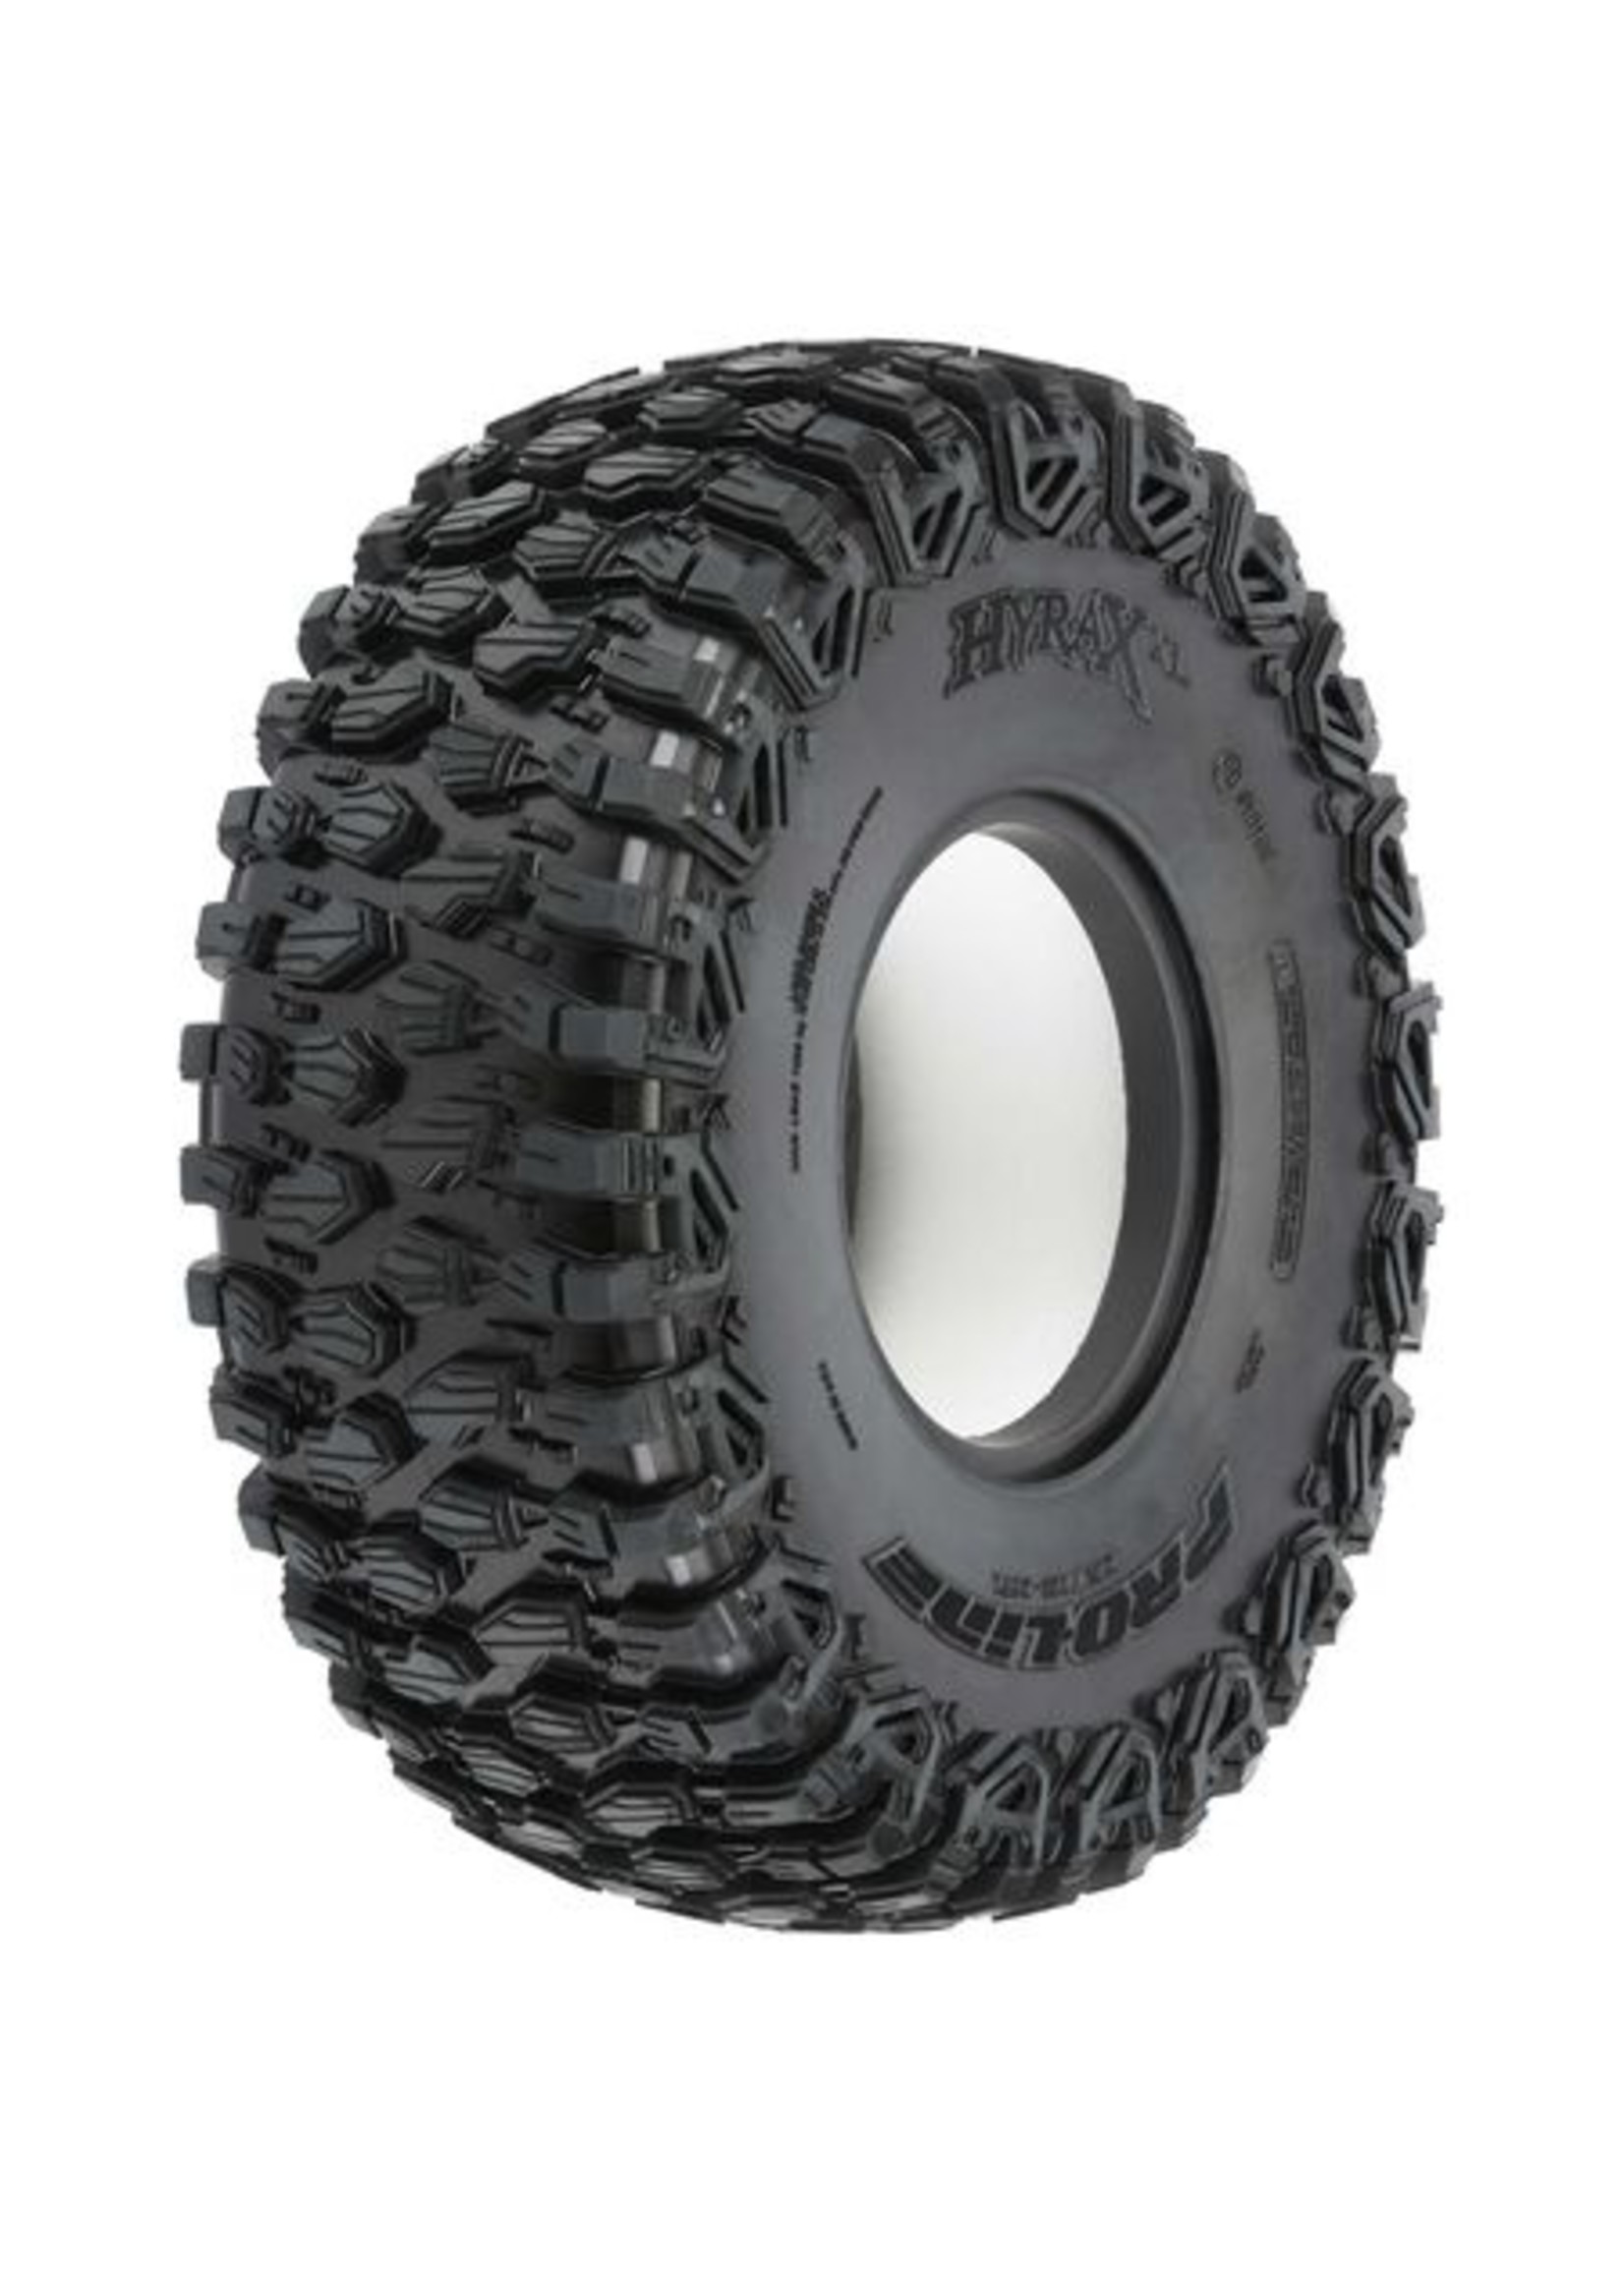 Pro-Line PRO1018614 - 1/6 Hyrax XL G8 Front/Rear 2.9" Rock Crawling Tires